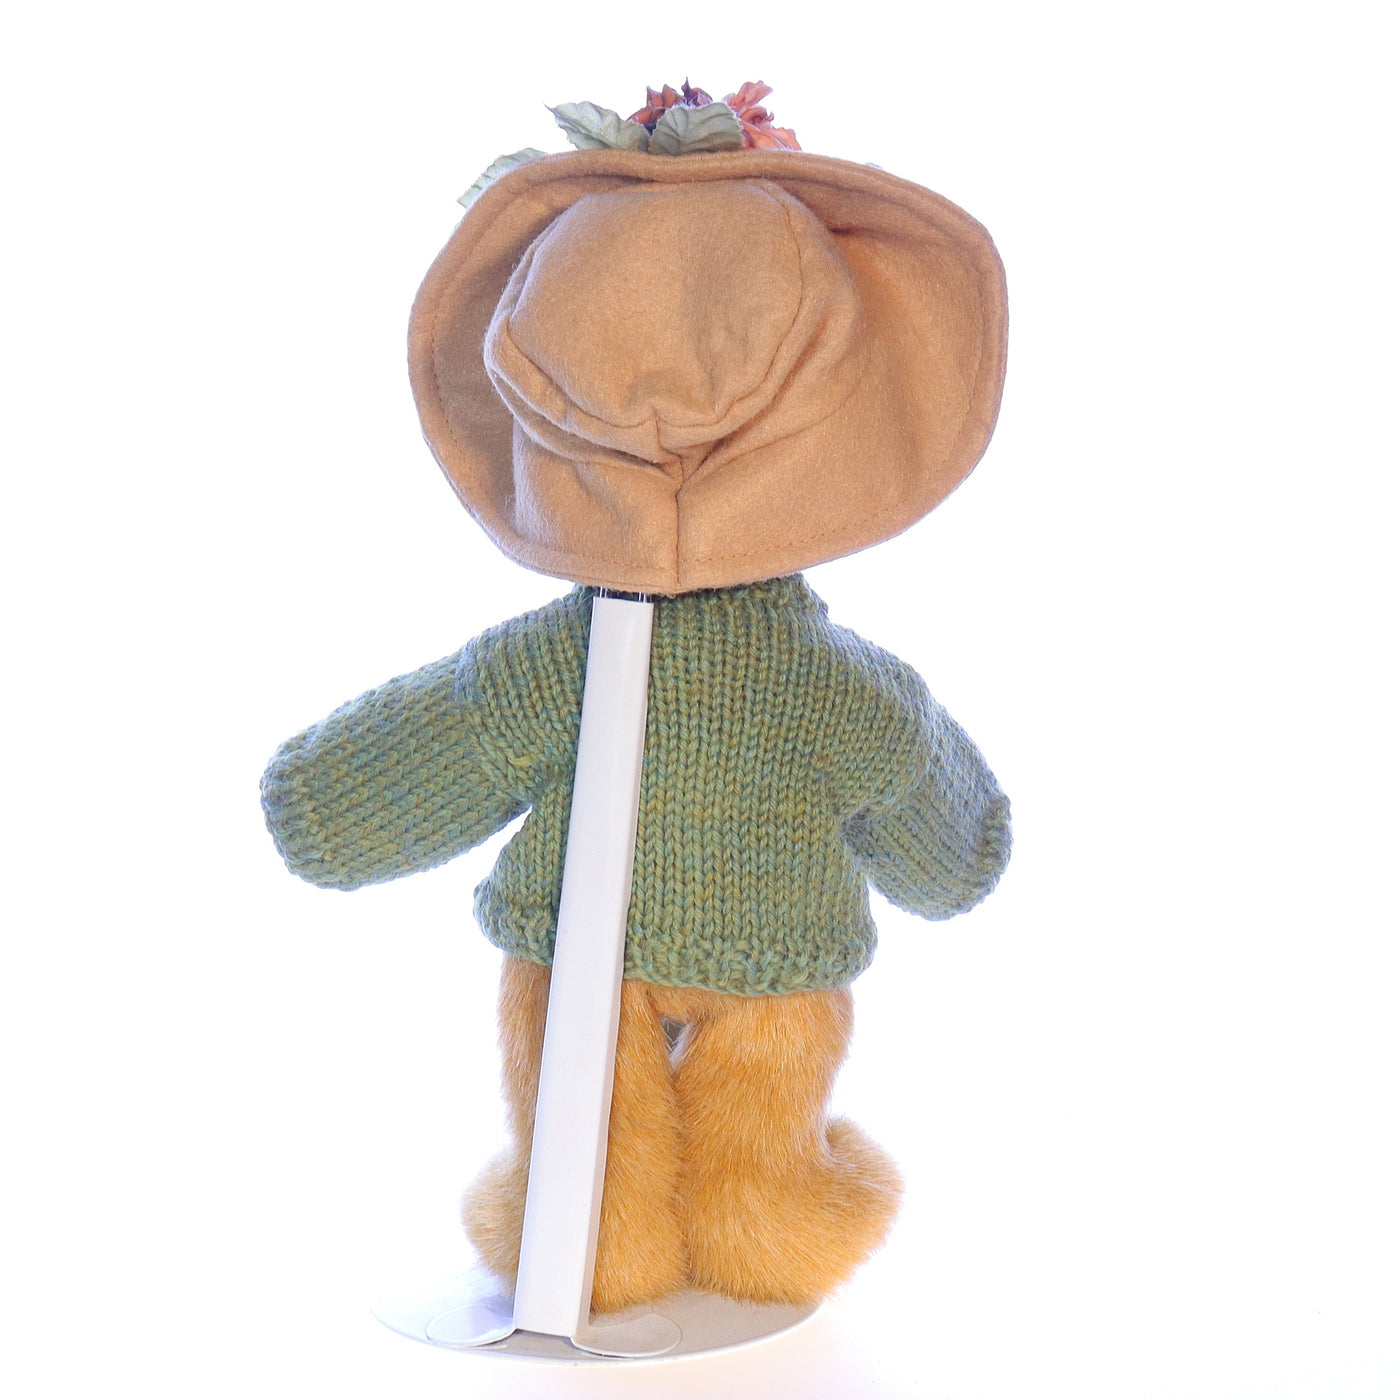 Boyds_Bears_and_Friends_91833_Mrs_Trumbull_Fashion_Stuffed_Animal_1985 Back View